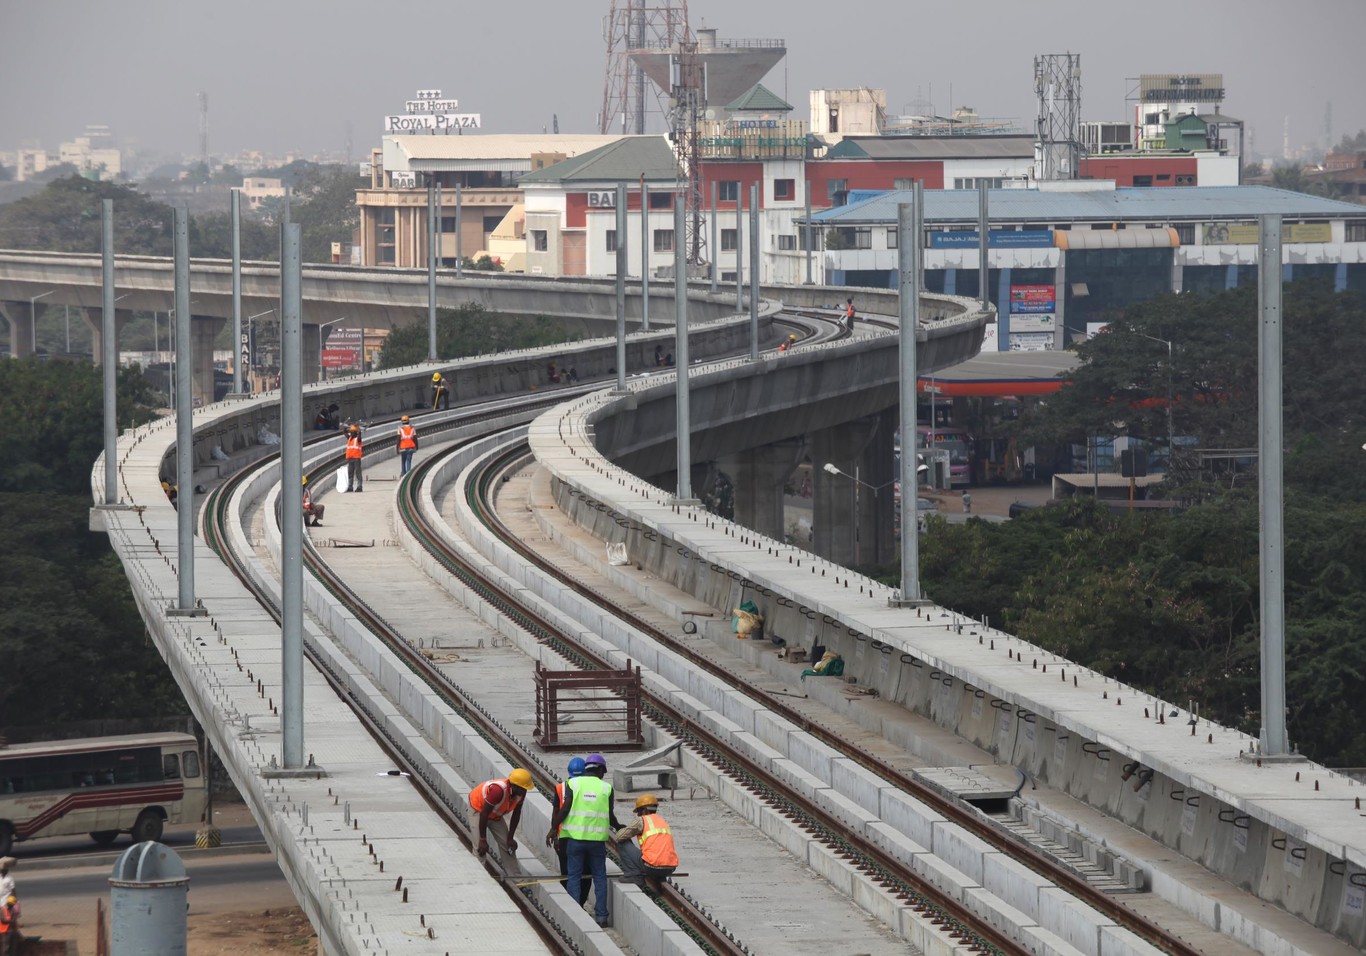 Track laying for the Chennai metro Infrastructure project. | Copyright/Ownership : Alstom Transport/ F. Christophoridès